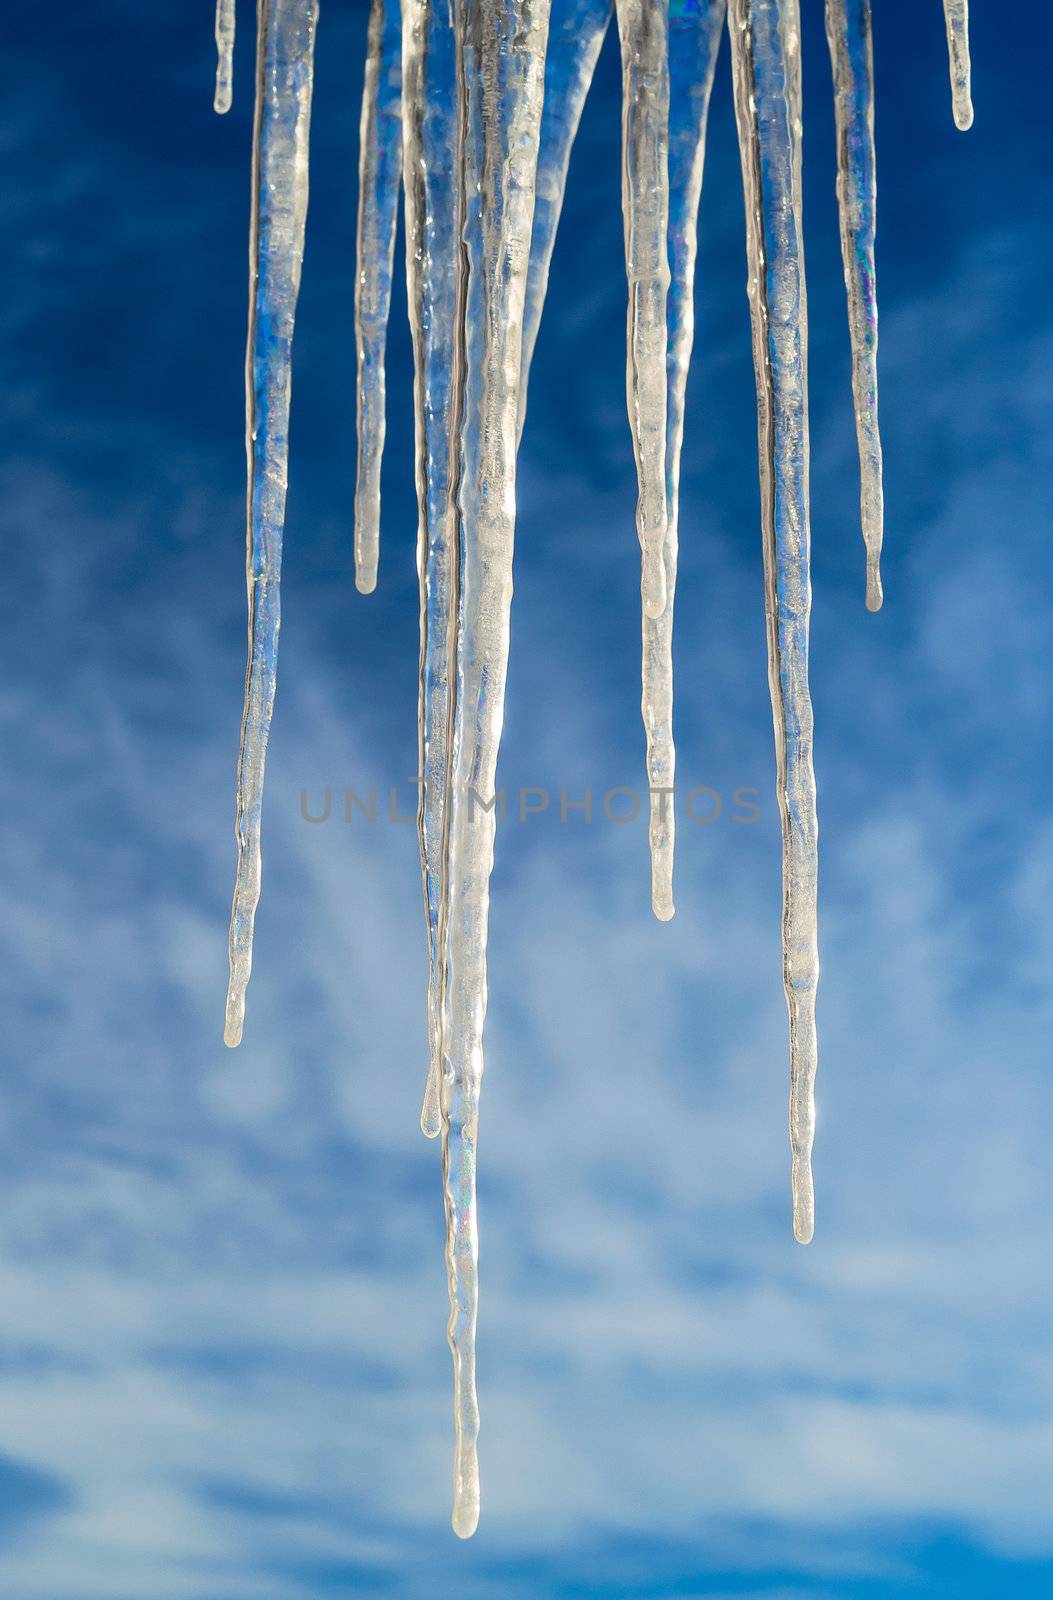 Icicles Isolated over Blue Sky  by kirs-ua